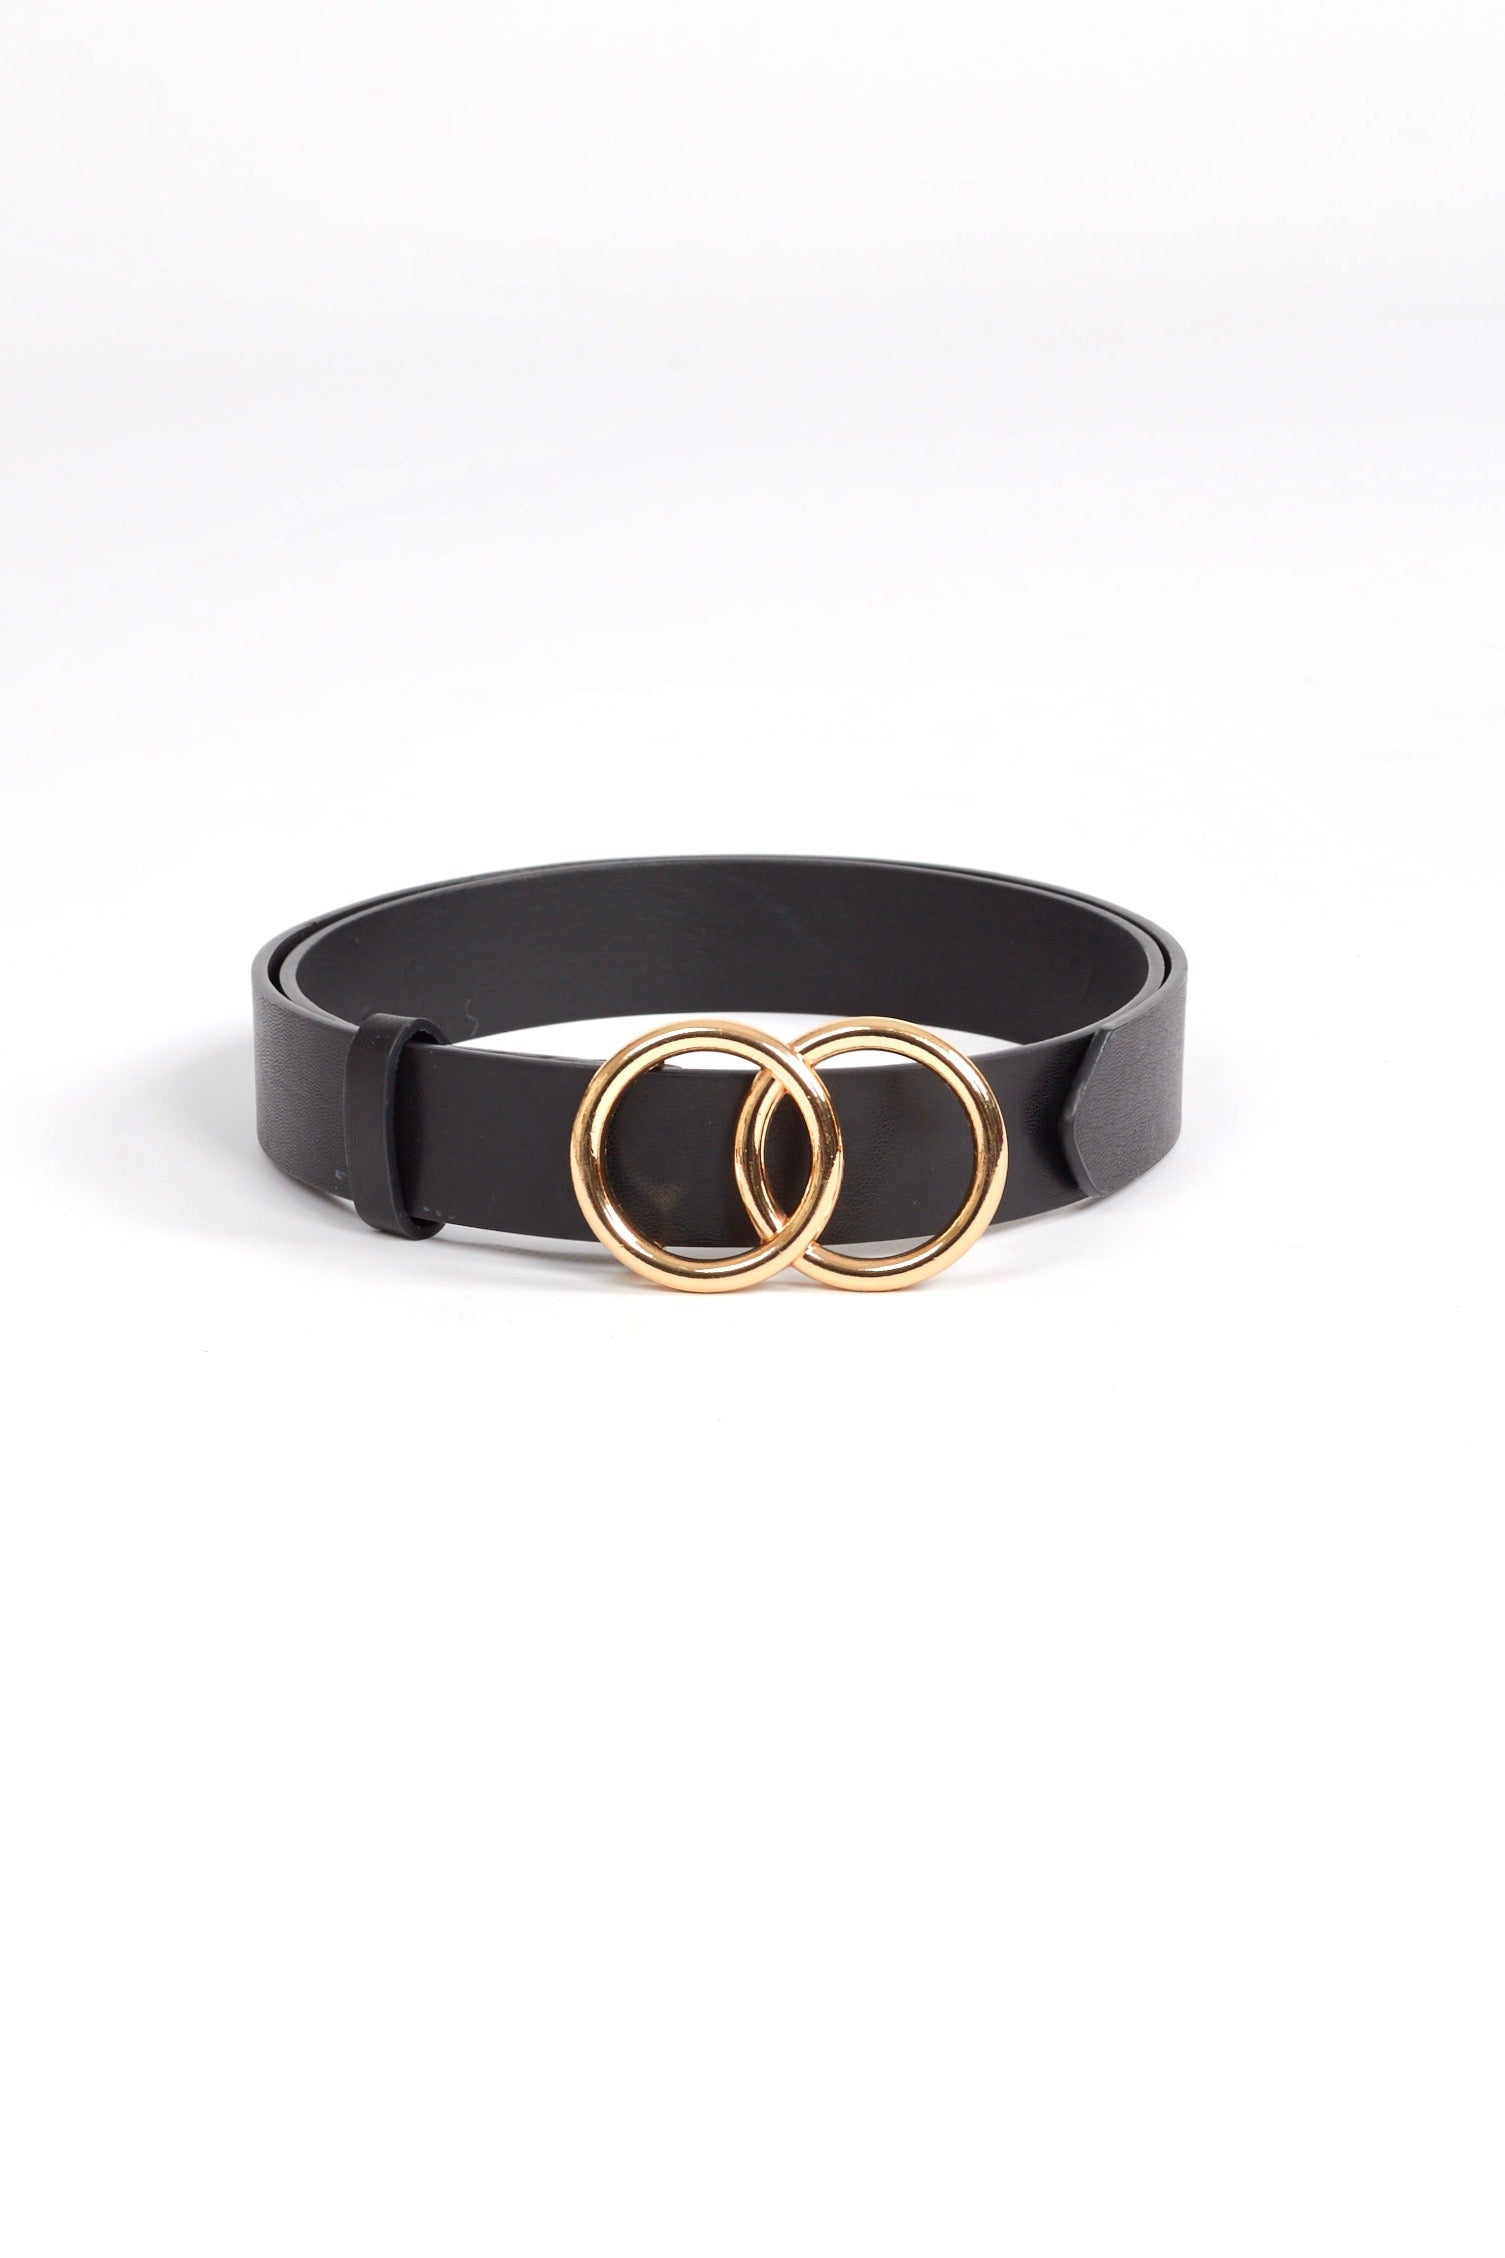 Black vegan leather belt with gold toned metal double circle belt buckle. Free shipping on domestic orders over $75. Afterpay available. We ship worldwide!